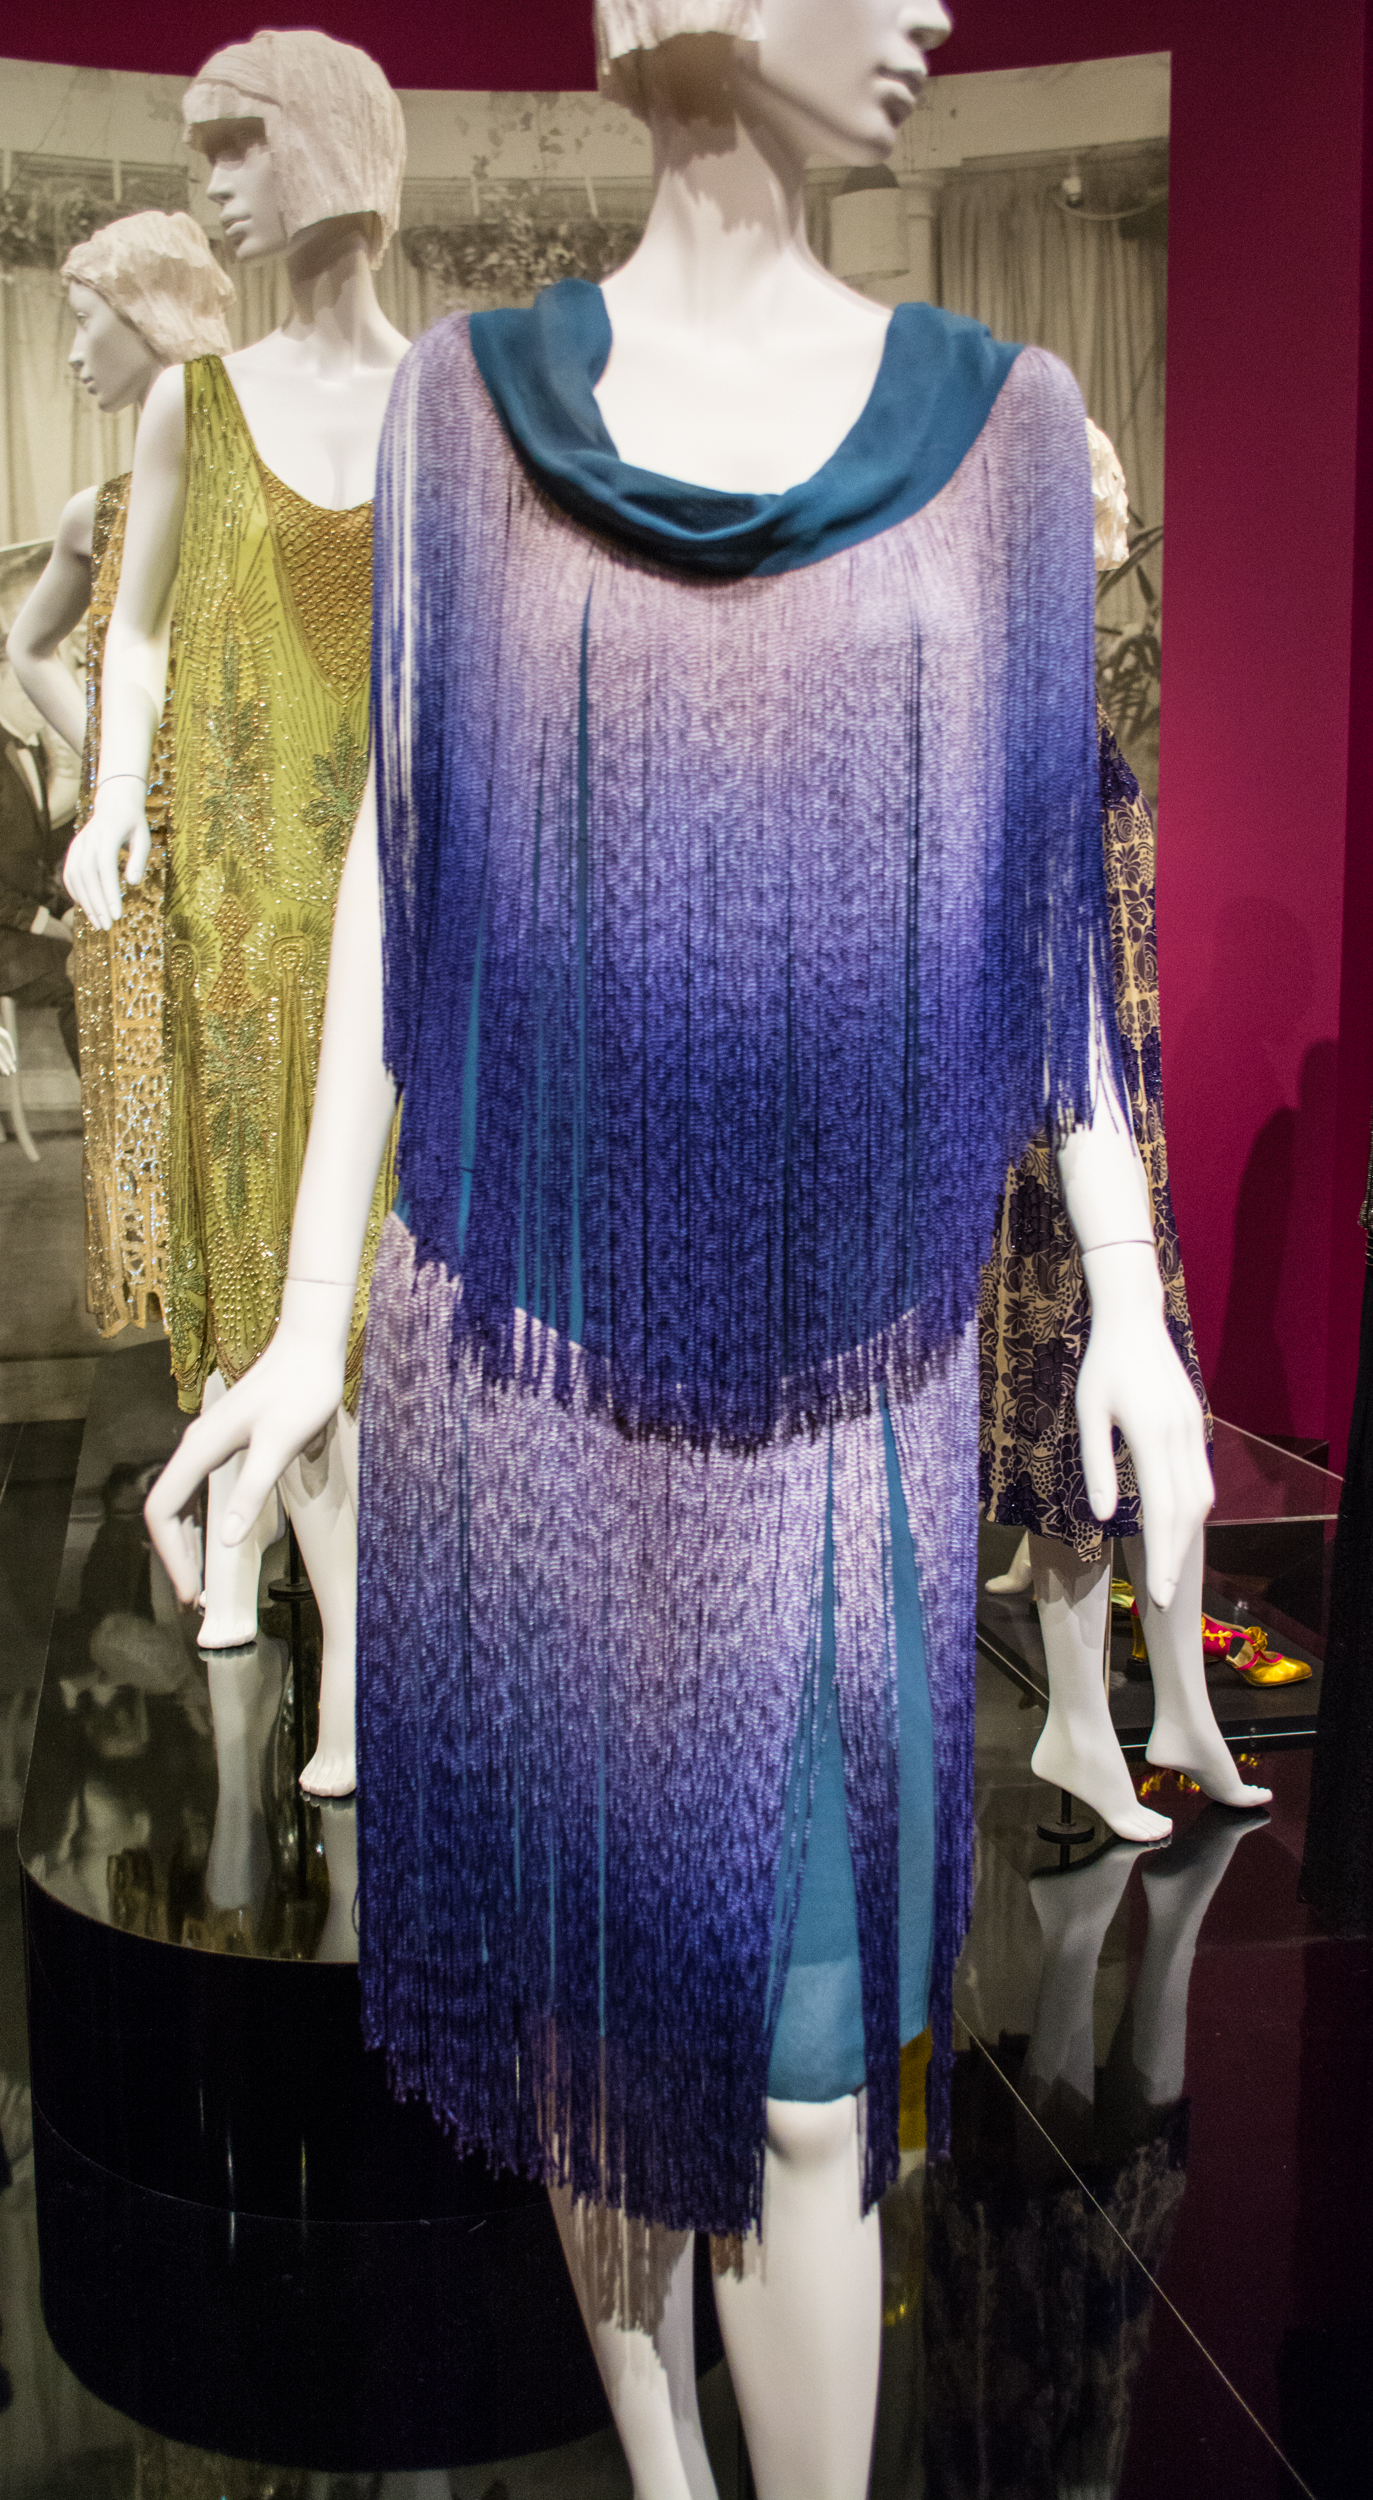 File:Evening dress and underslip - Coco Chanel (39715868291).jpg -  Wikimedia Commons